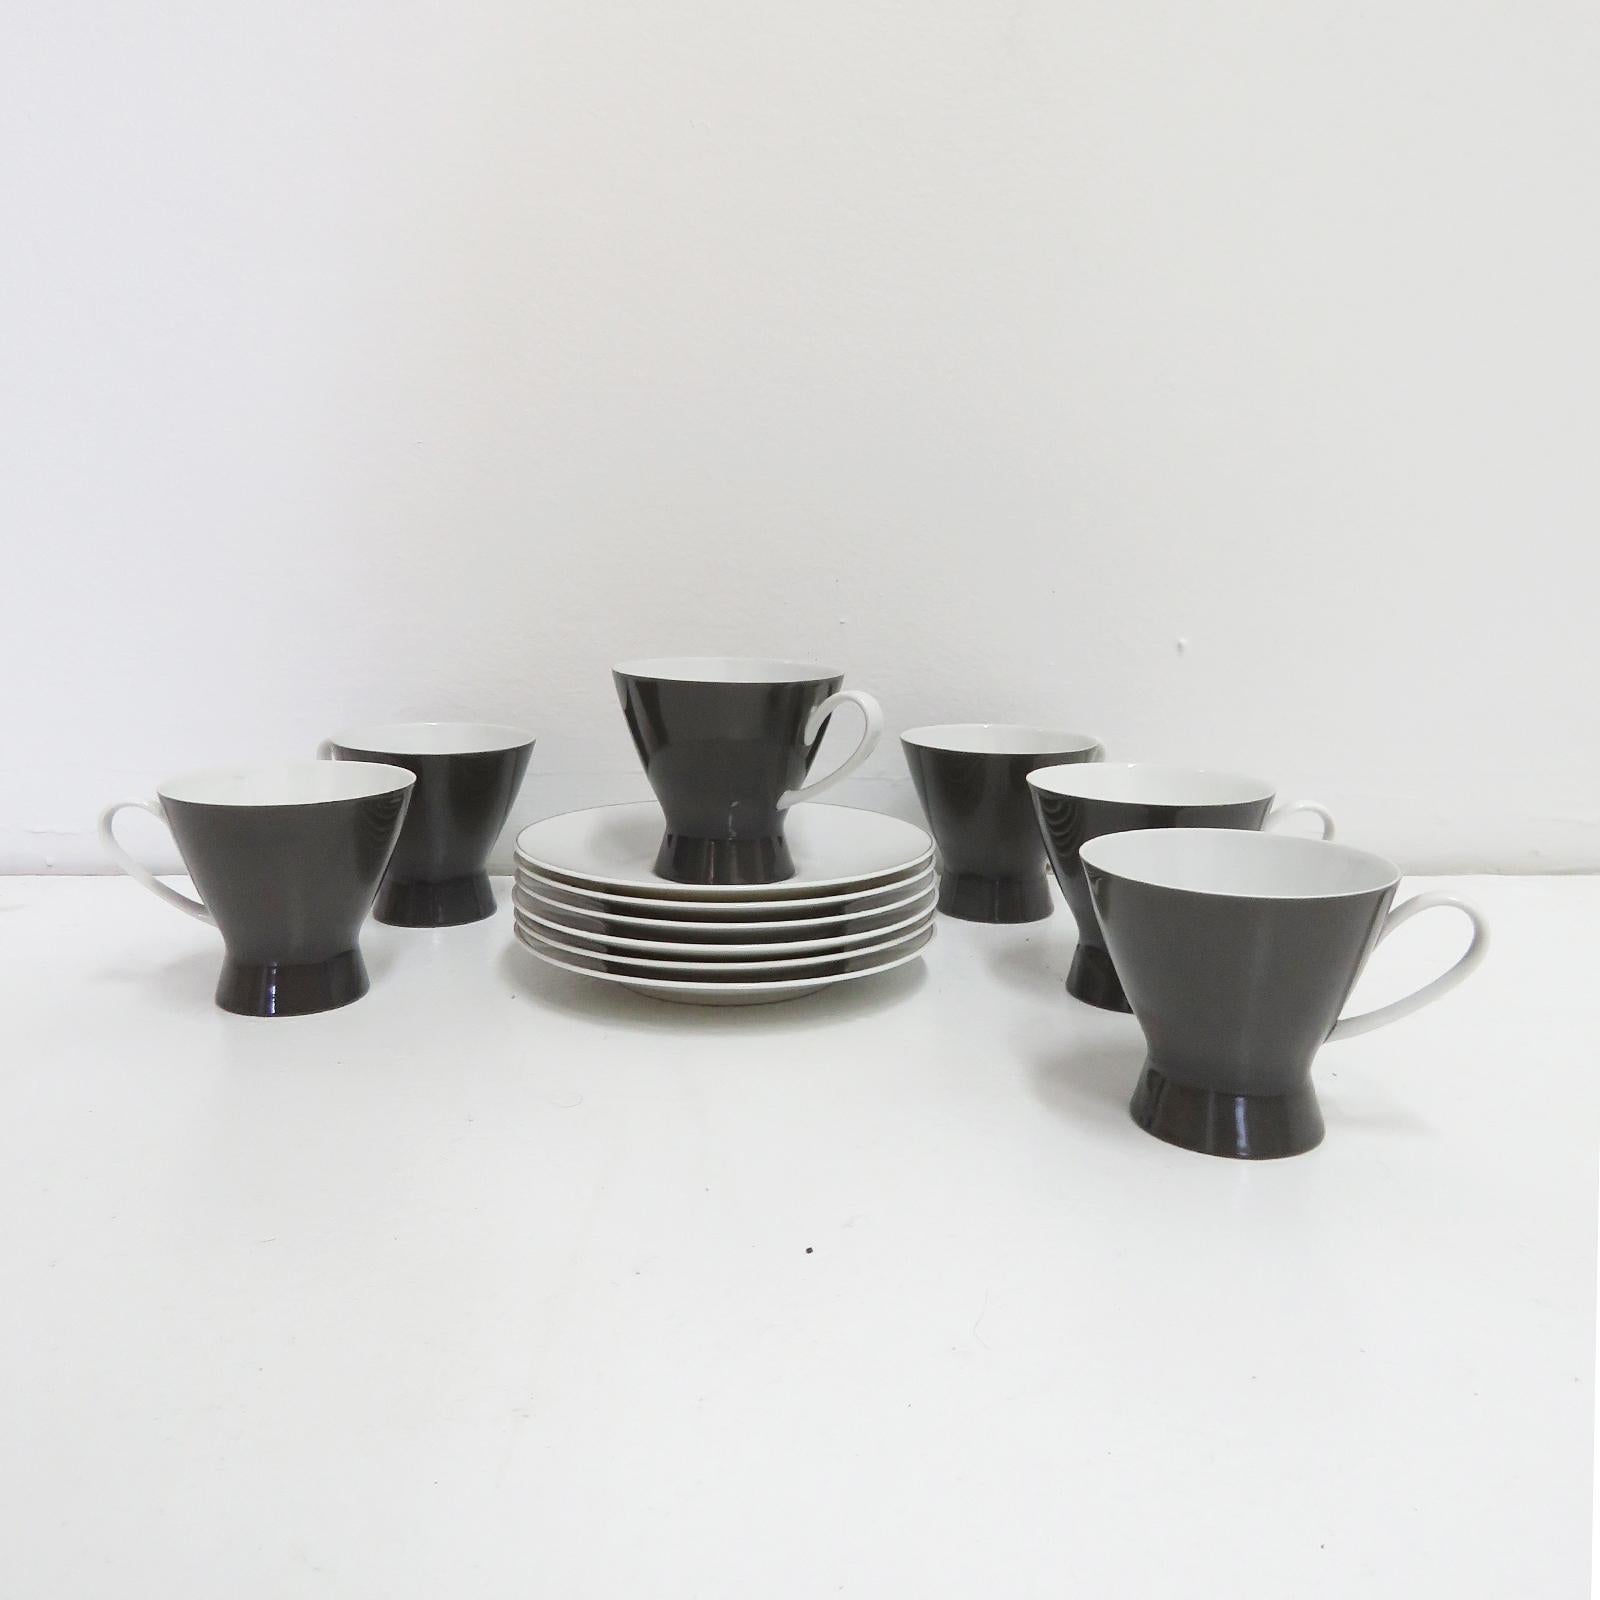 Raymond Loewy After Dinner Coffee Set for 